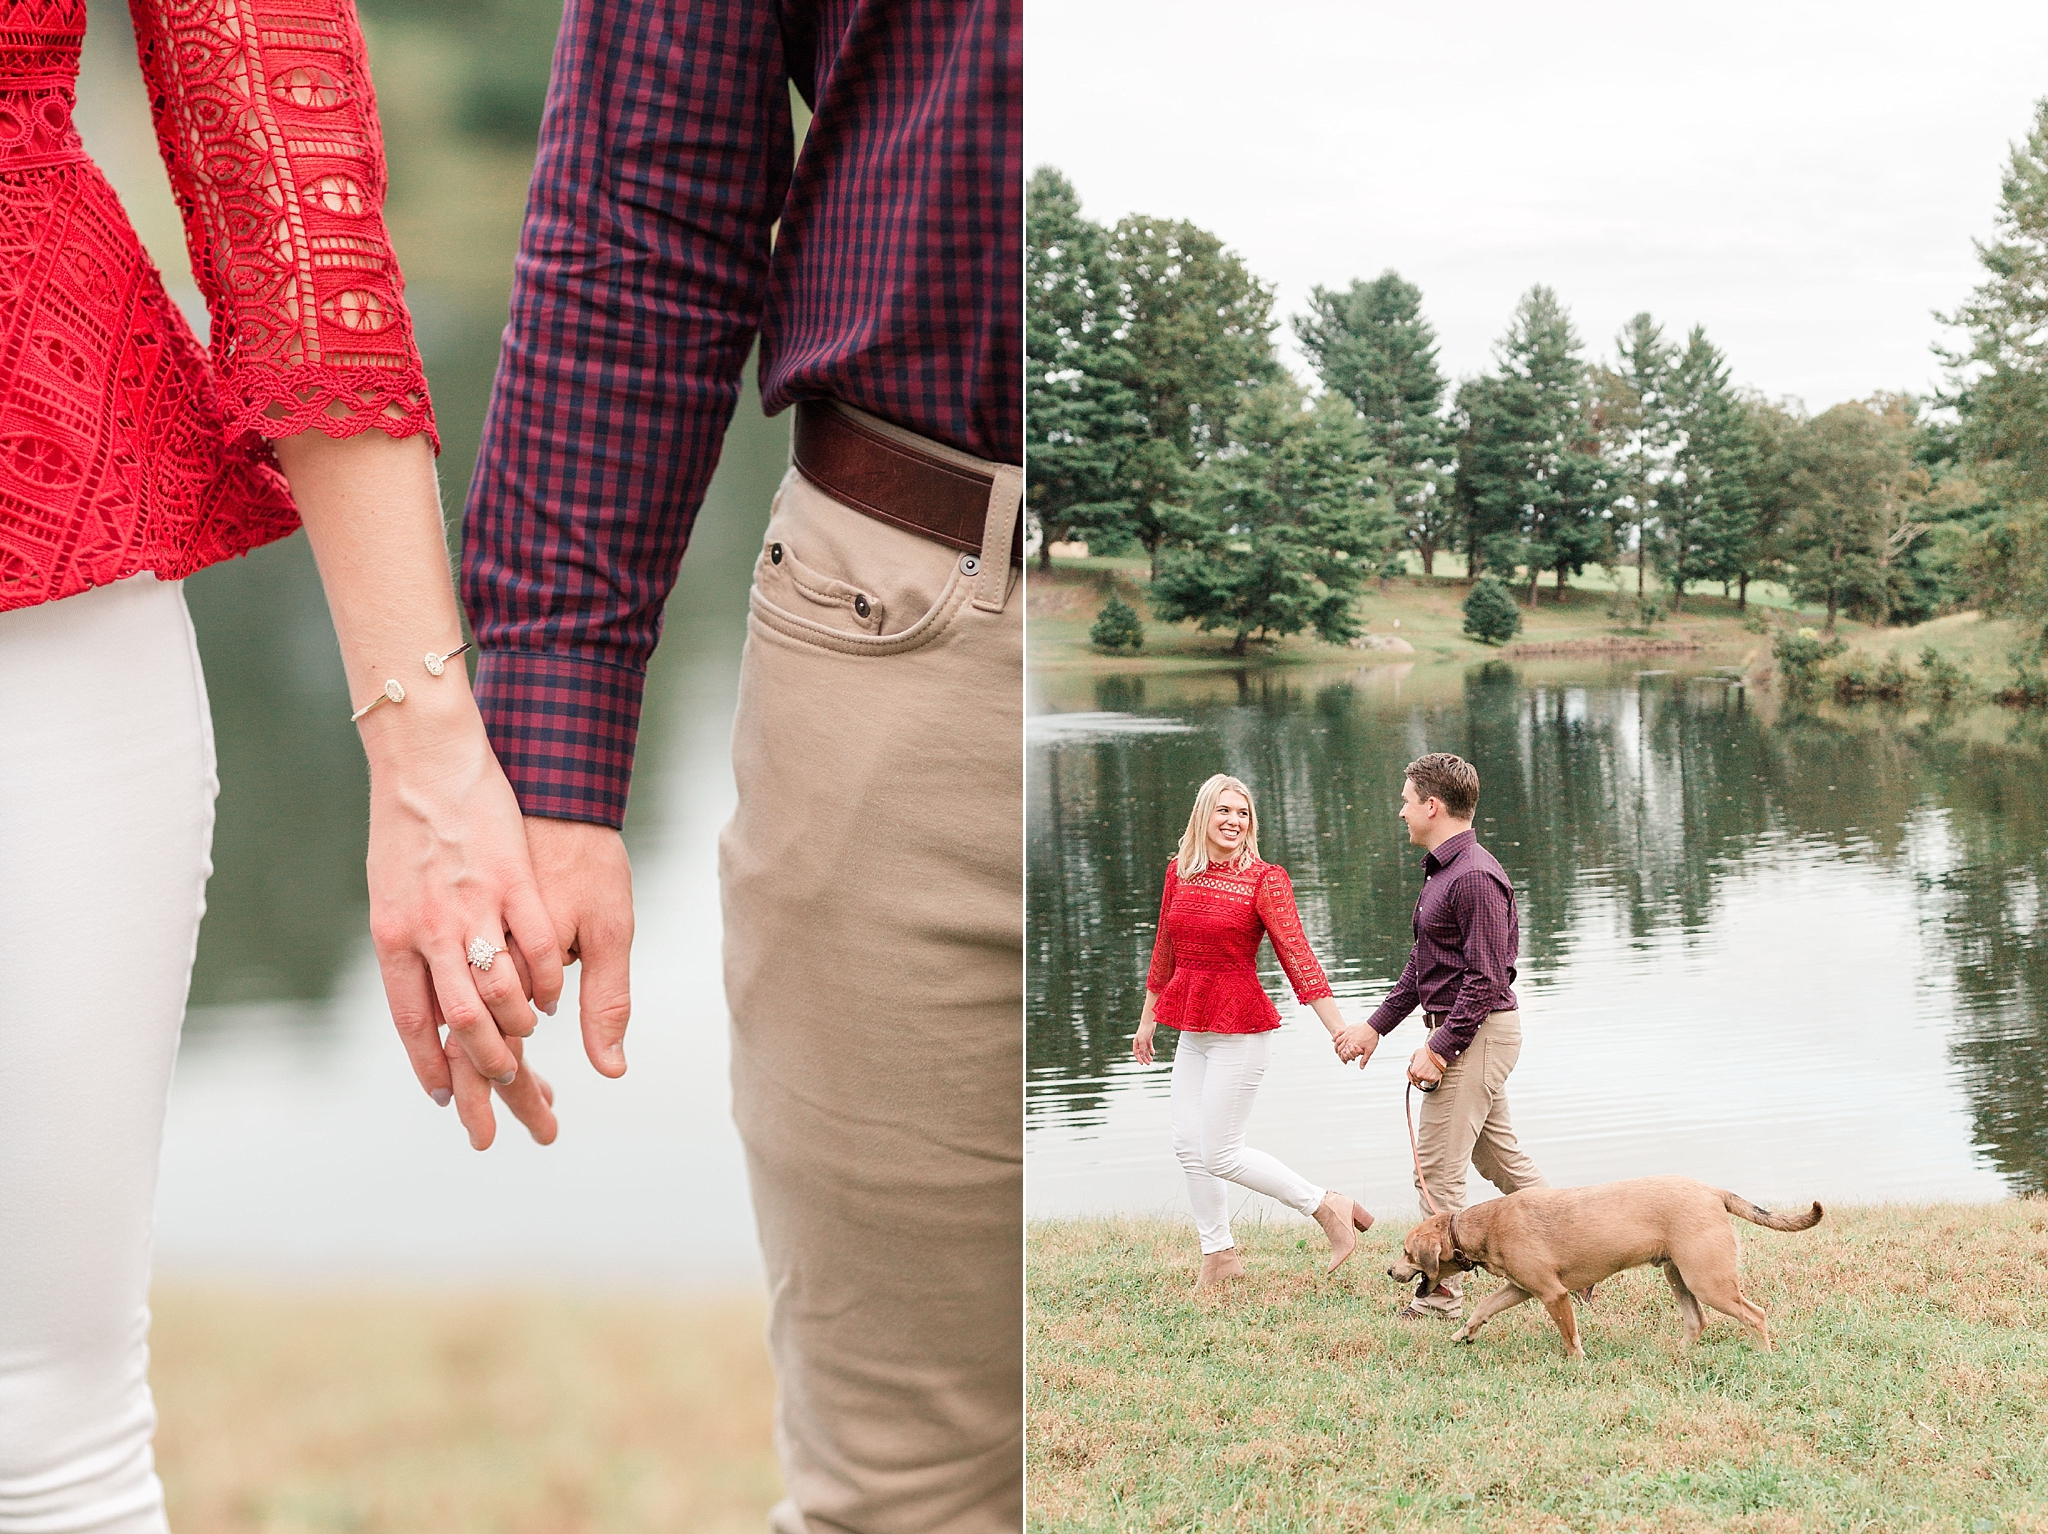 A romantic fall engagement session in the gardens of Airlie Center in Warrenton, VA.